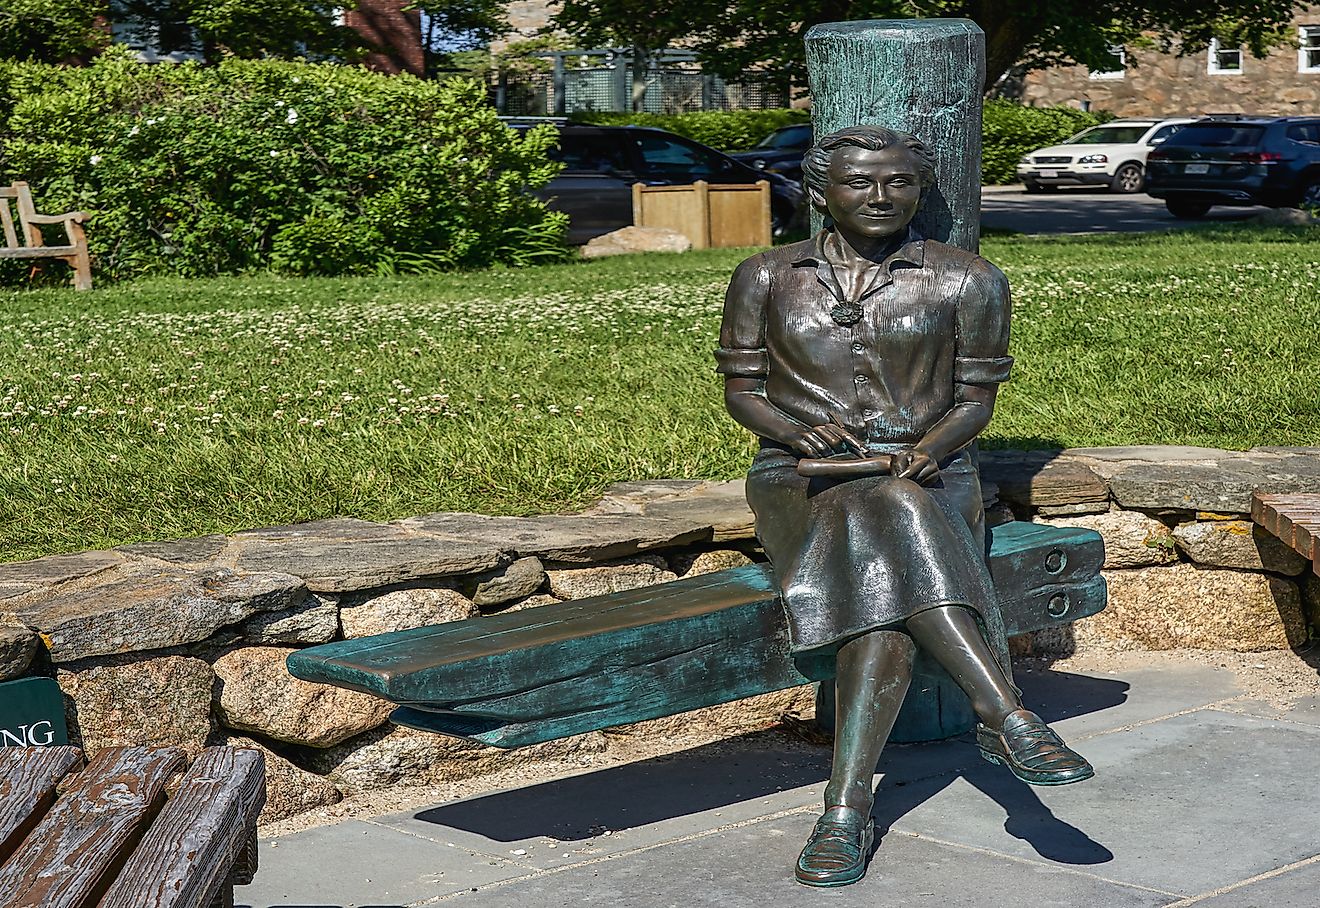 The statue of Rachel Carson author of Silent Spring sits at Waterfront Park.